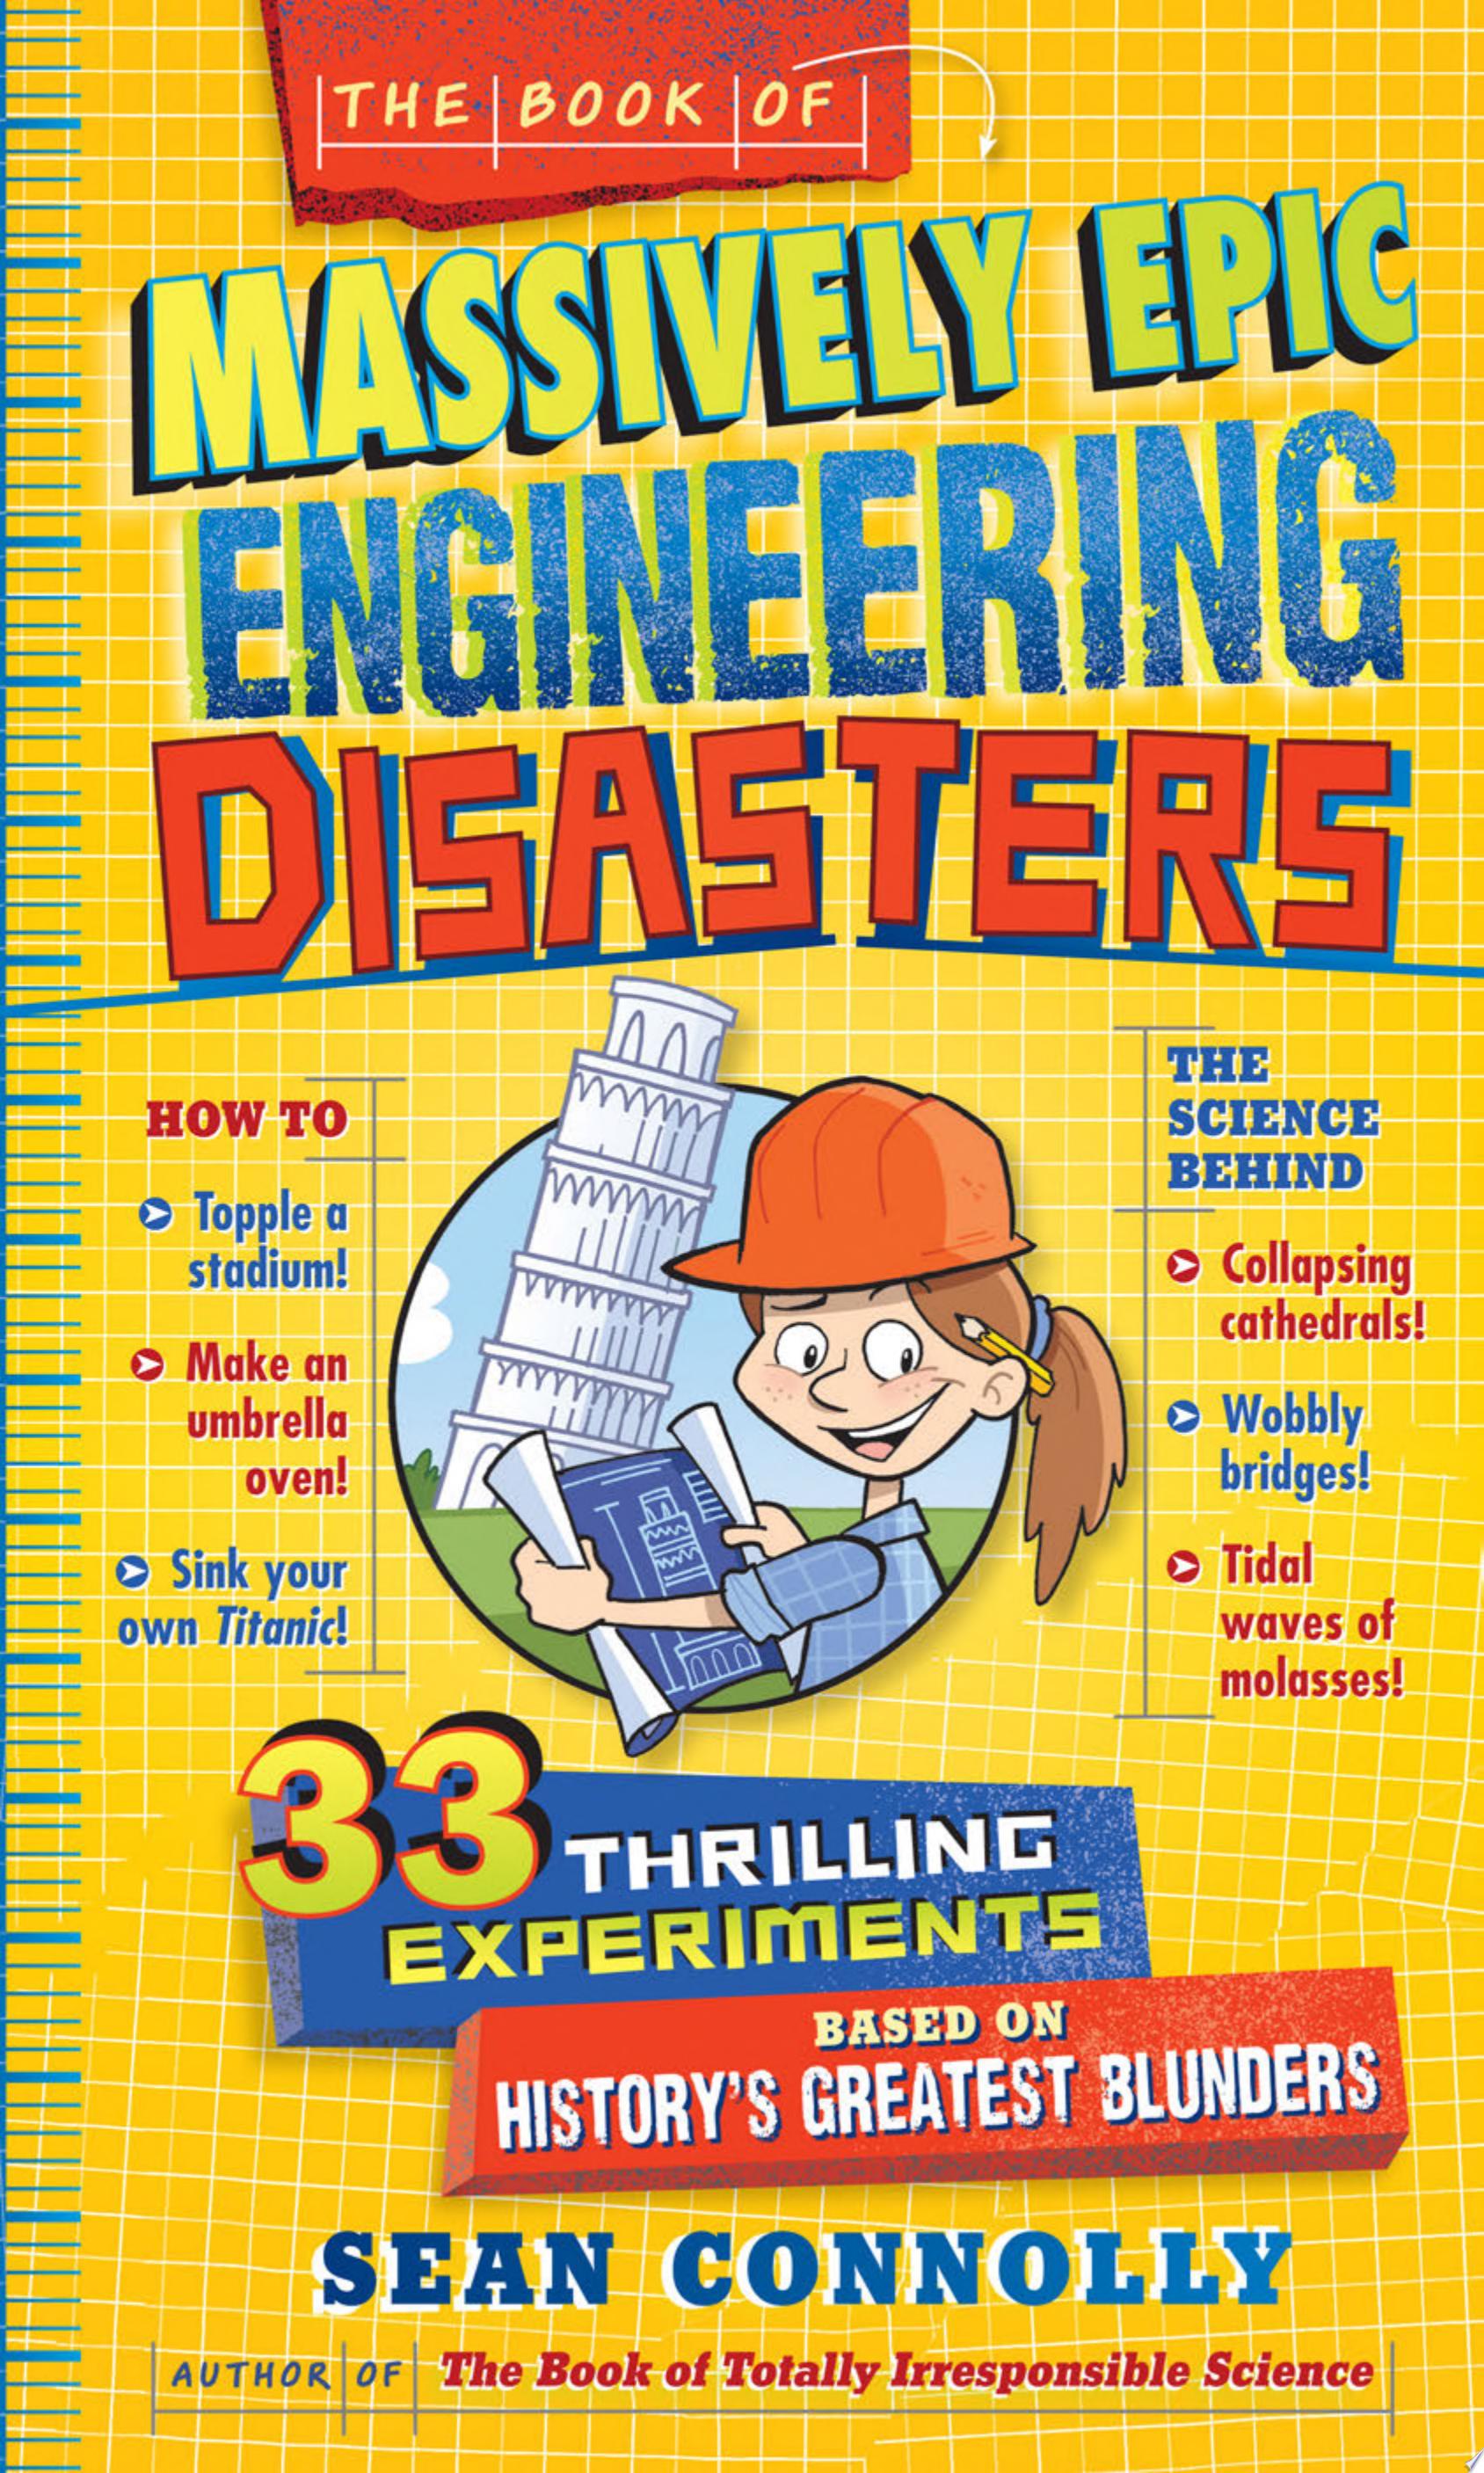 Image for "The Book of Massively Epic Engineering Disasters"